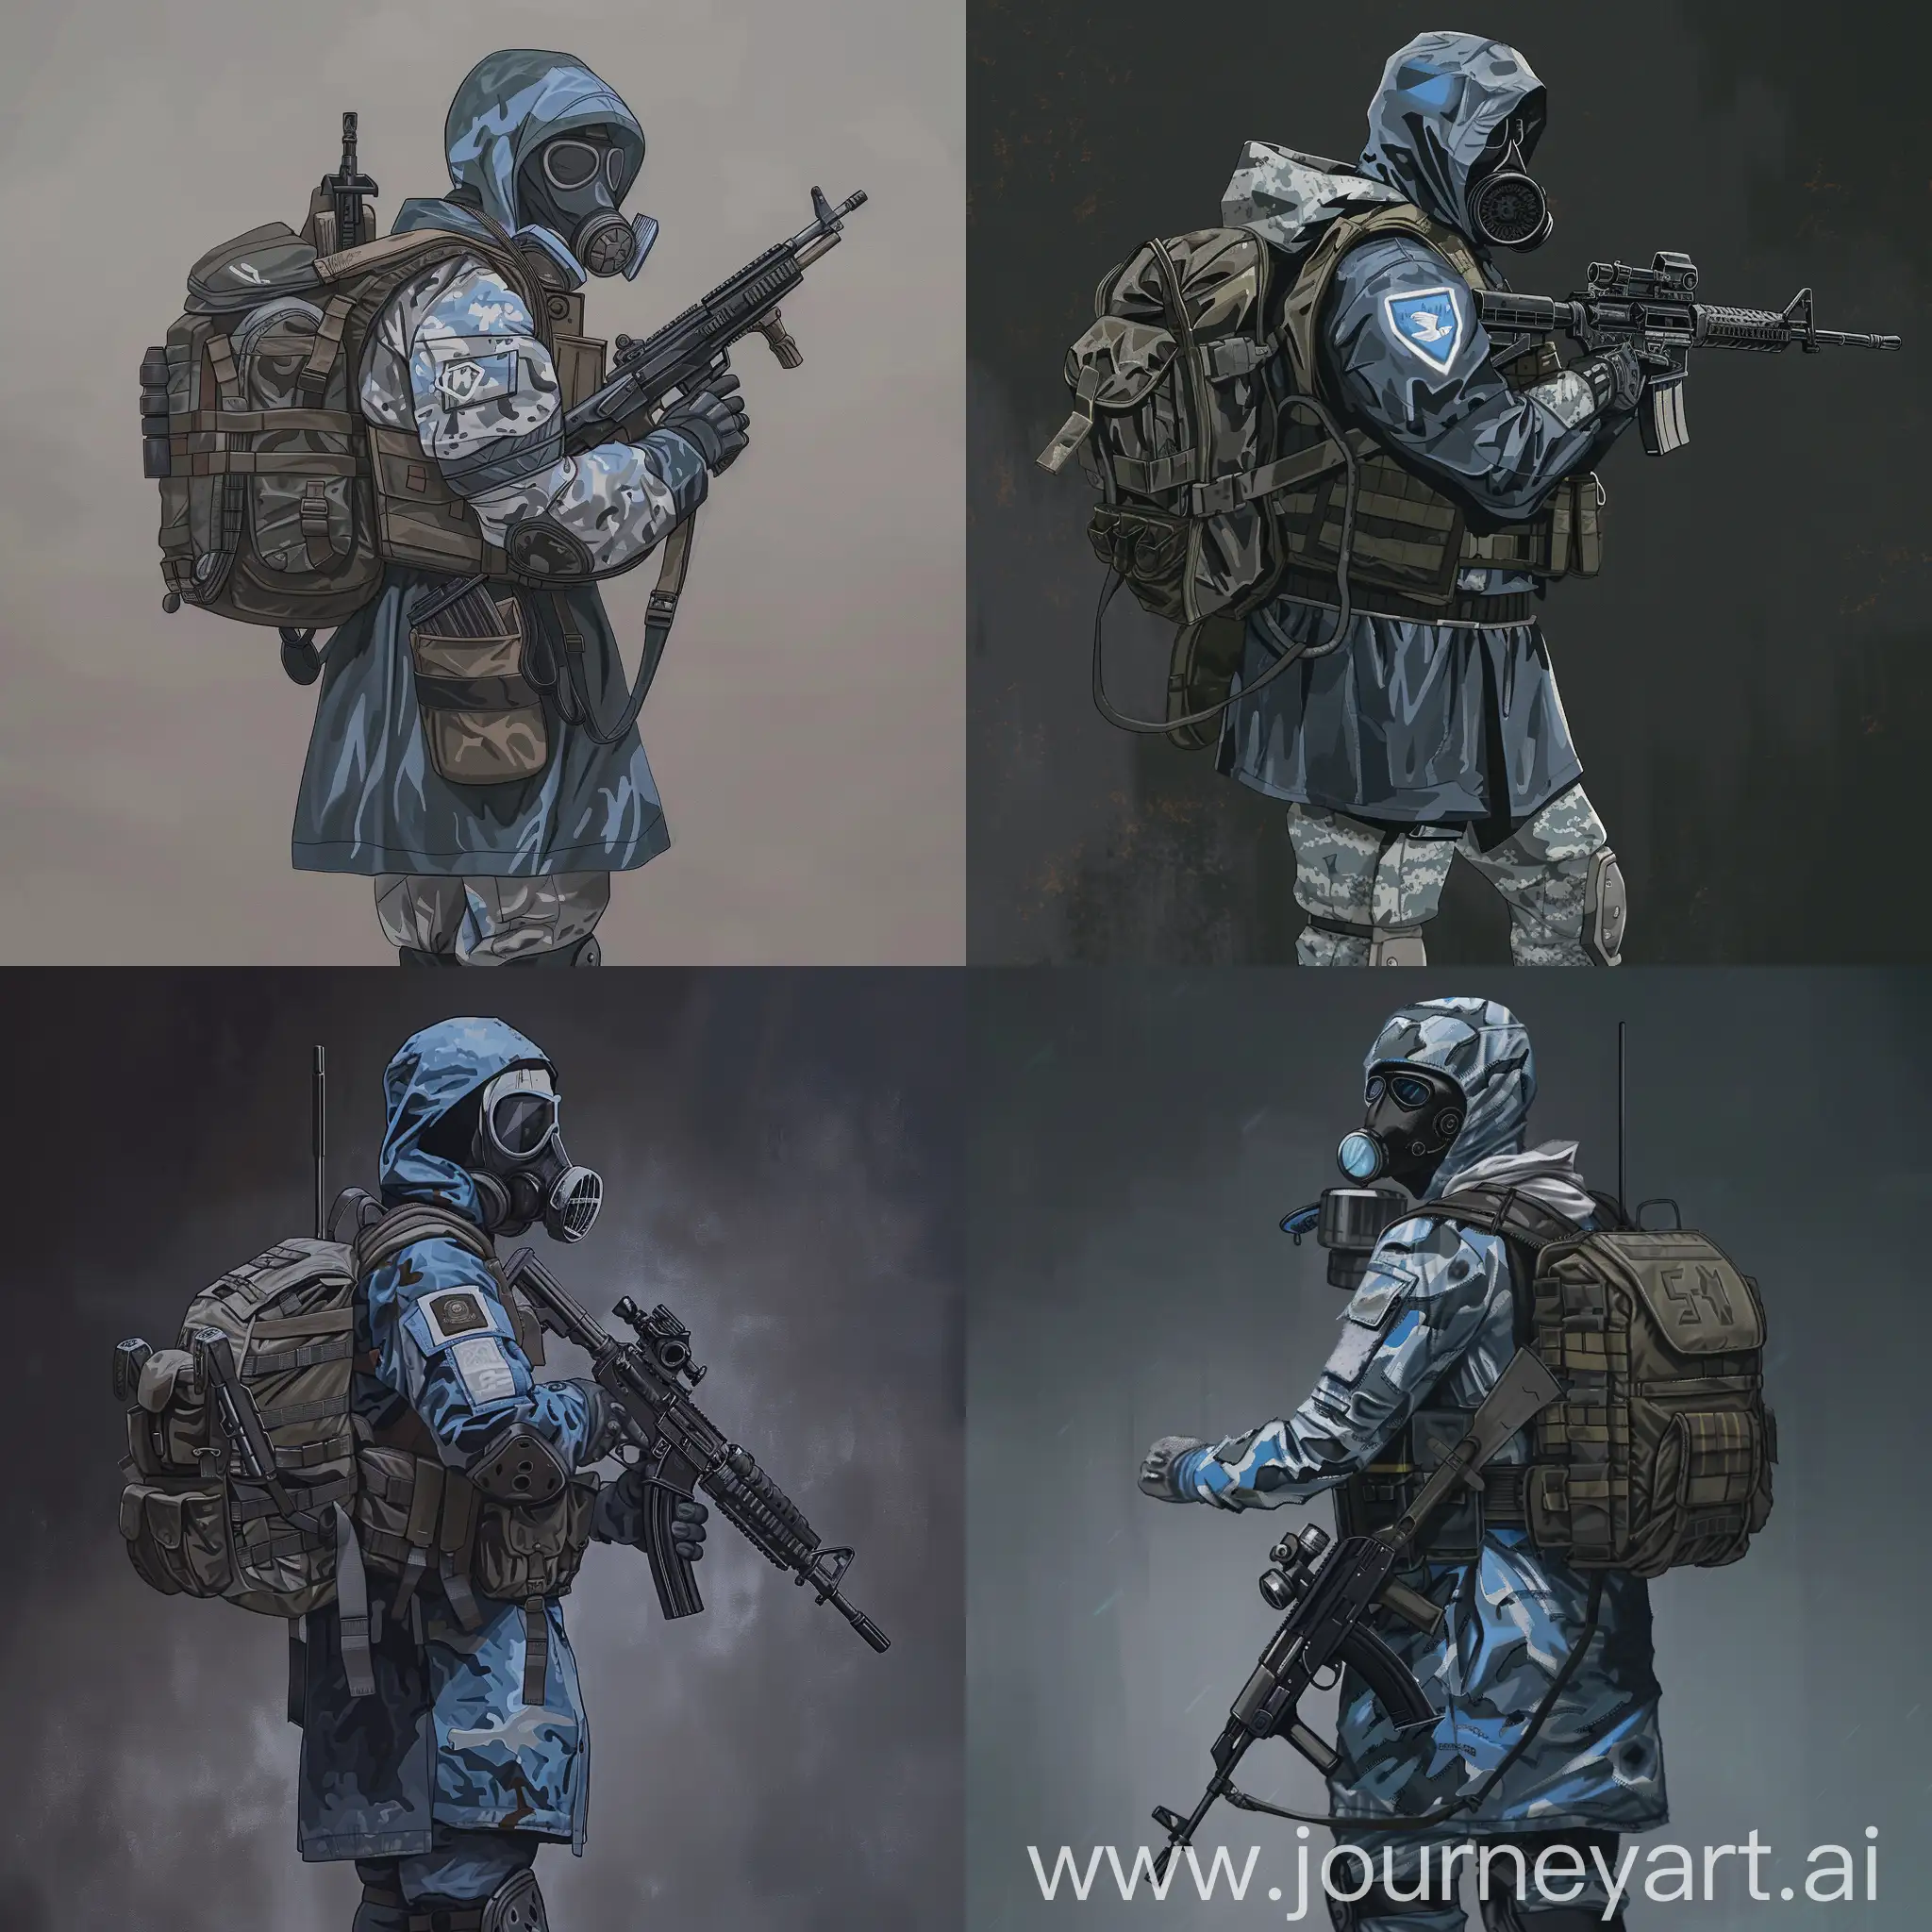 Digital art character  mercenary from the universe of S.T.A.L.K.E.R., dressed in a dark blue military raincoat, gray military armor on his body, a gasmask on his face, a military backpack on his back, a rifle in his hands.